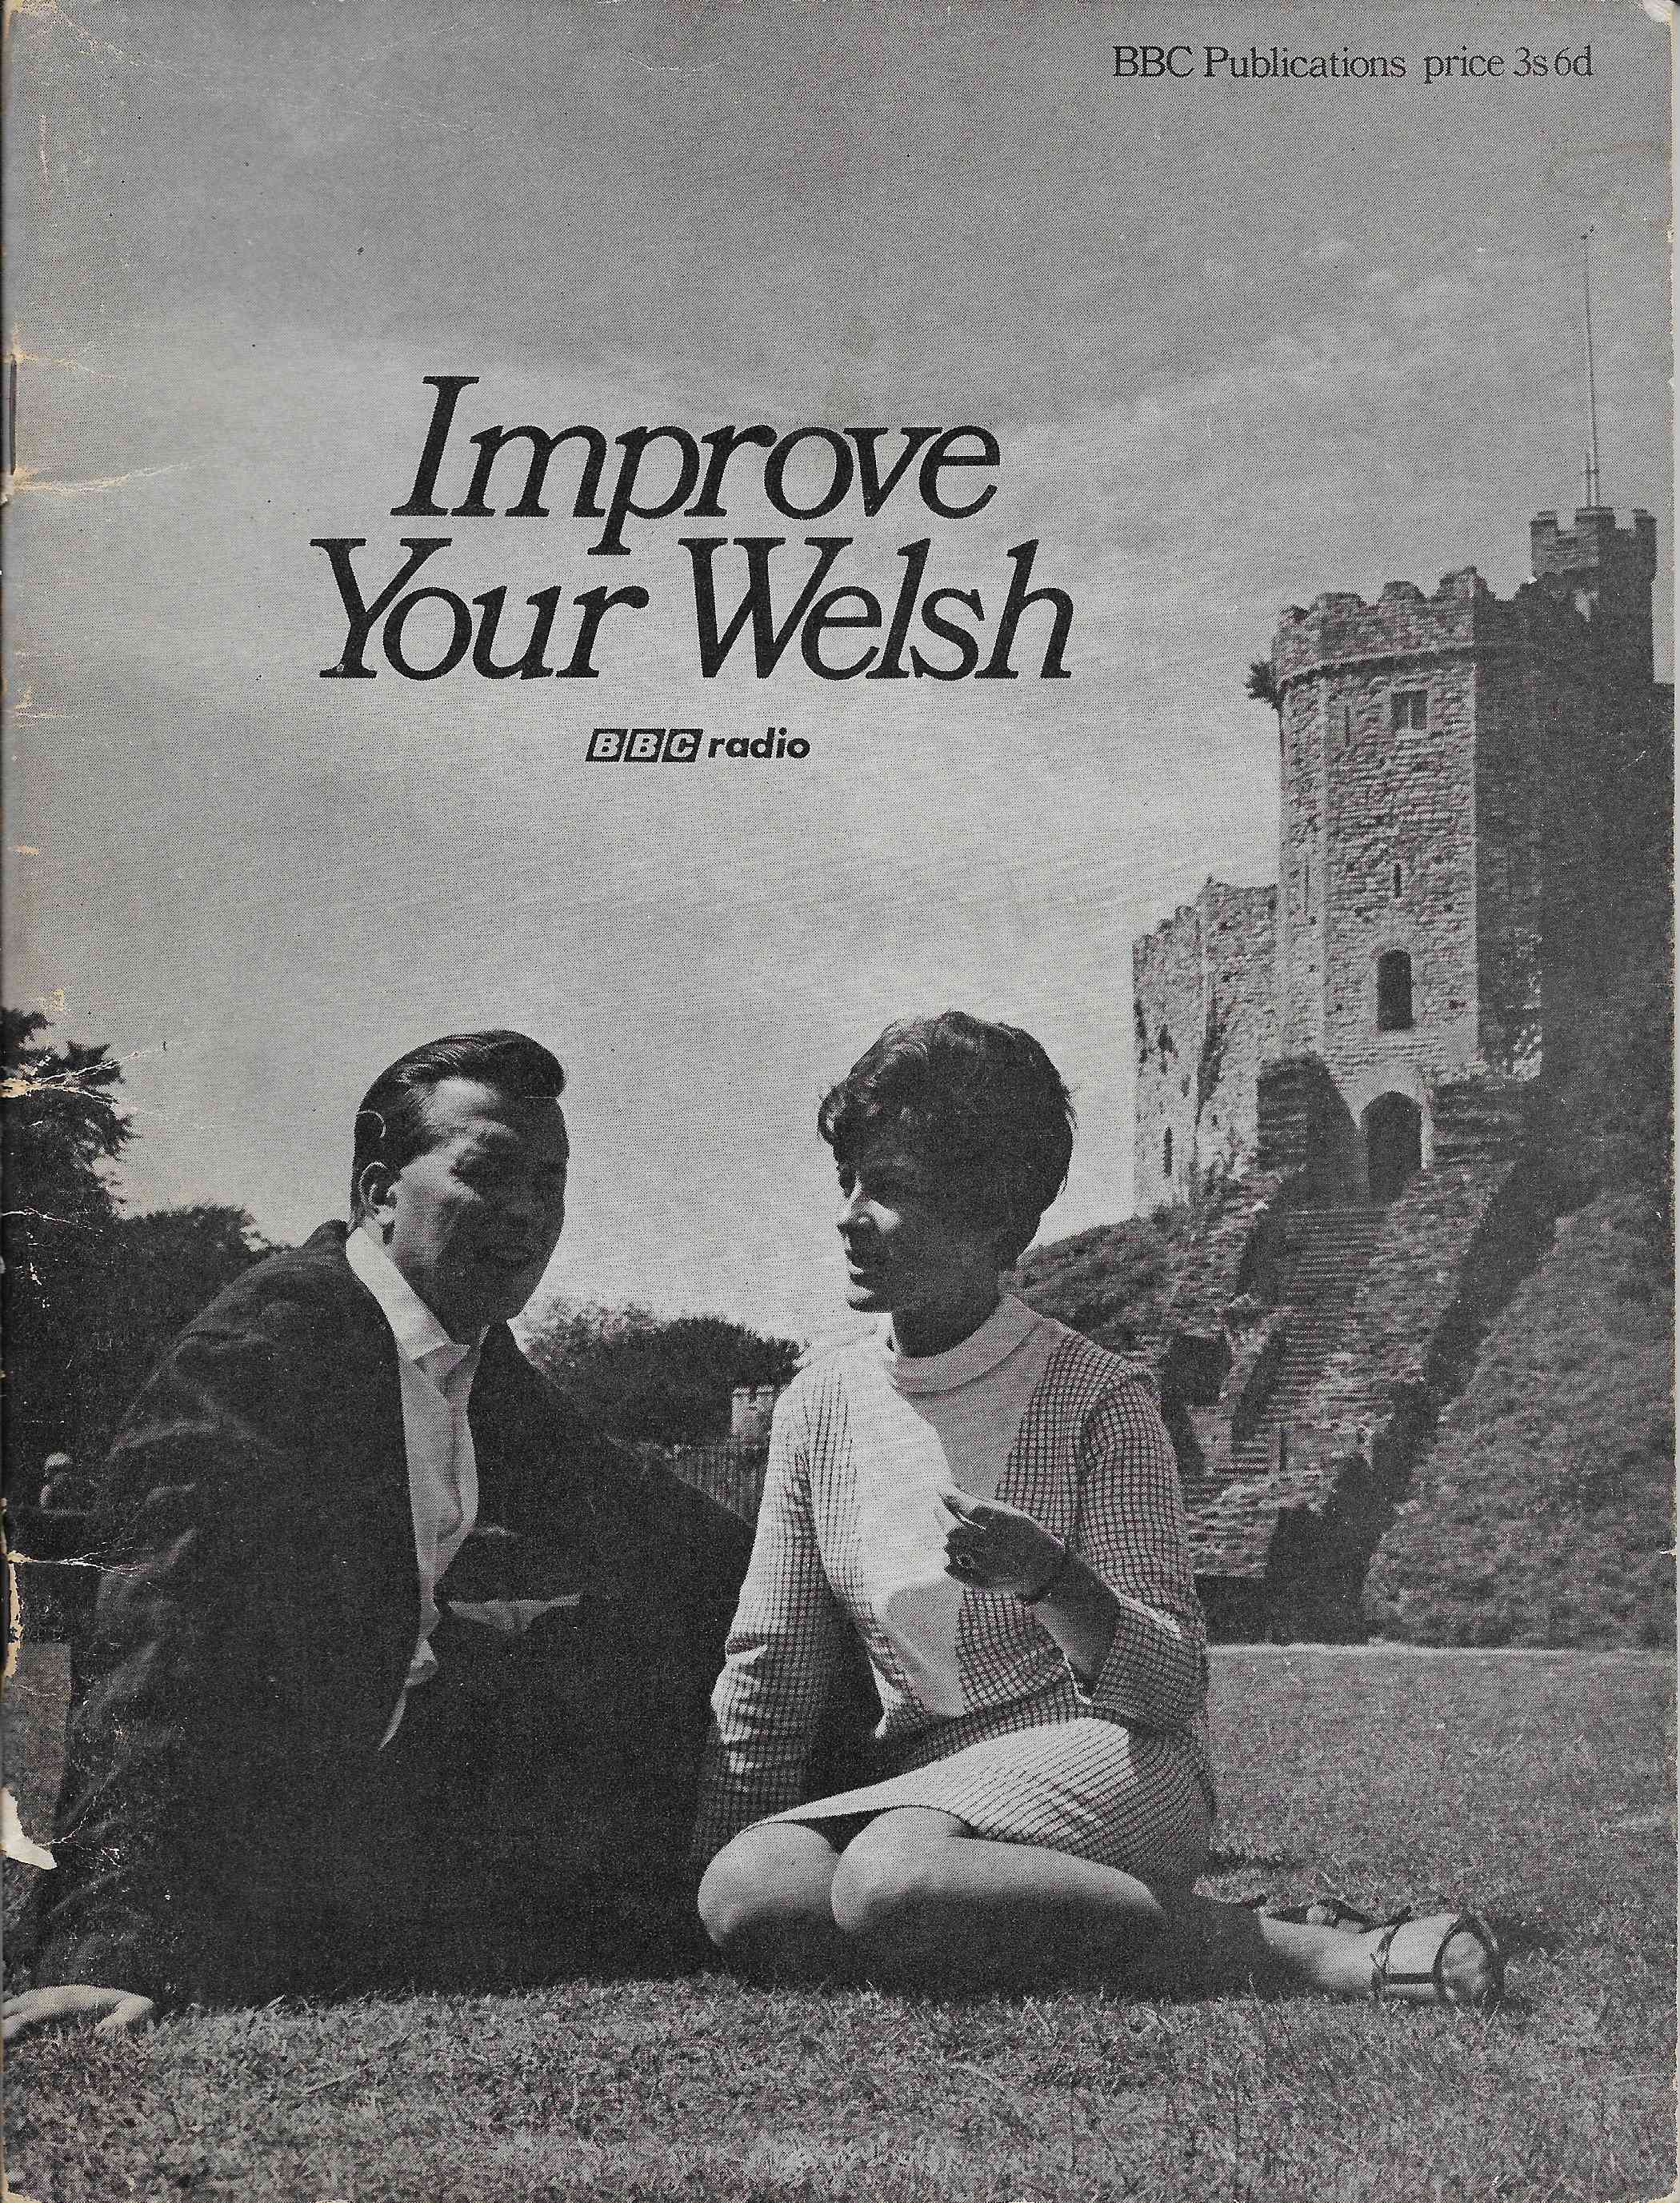 Picture of SNB 56307344 6 Improve your Welsh by artist Islwyn Ffowc Elis from the BBC books - Records and Tapes library